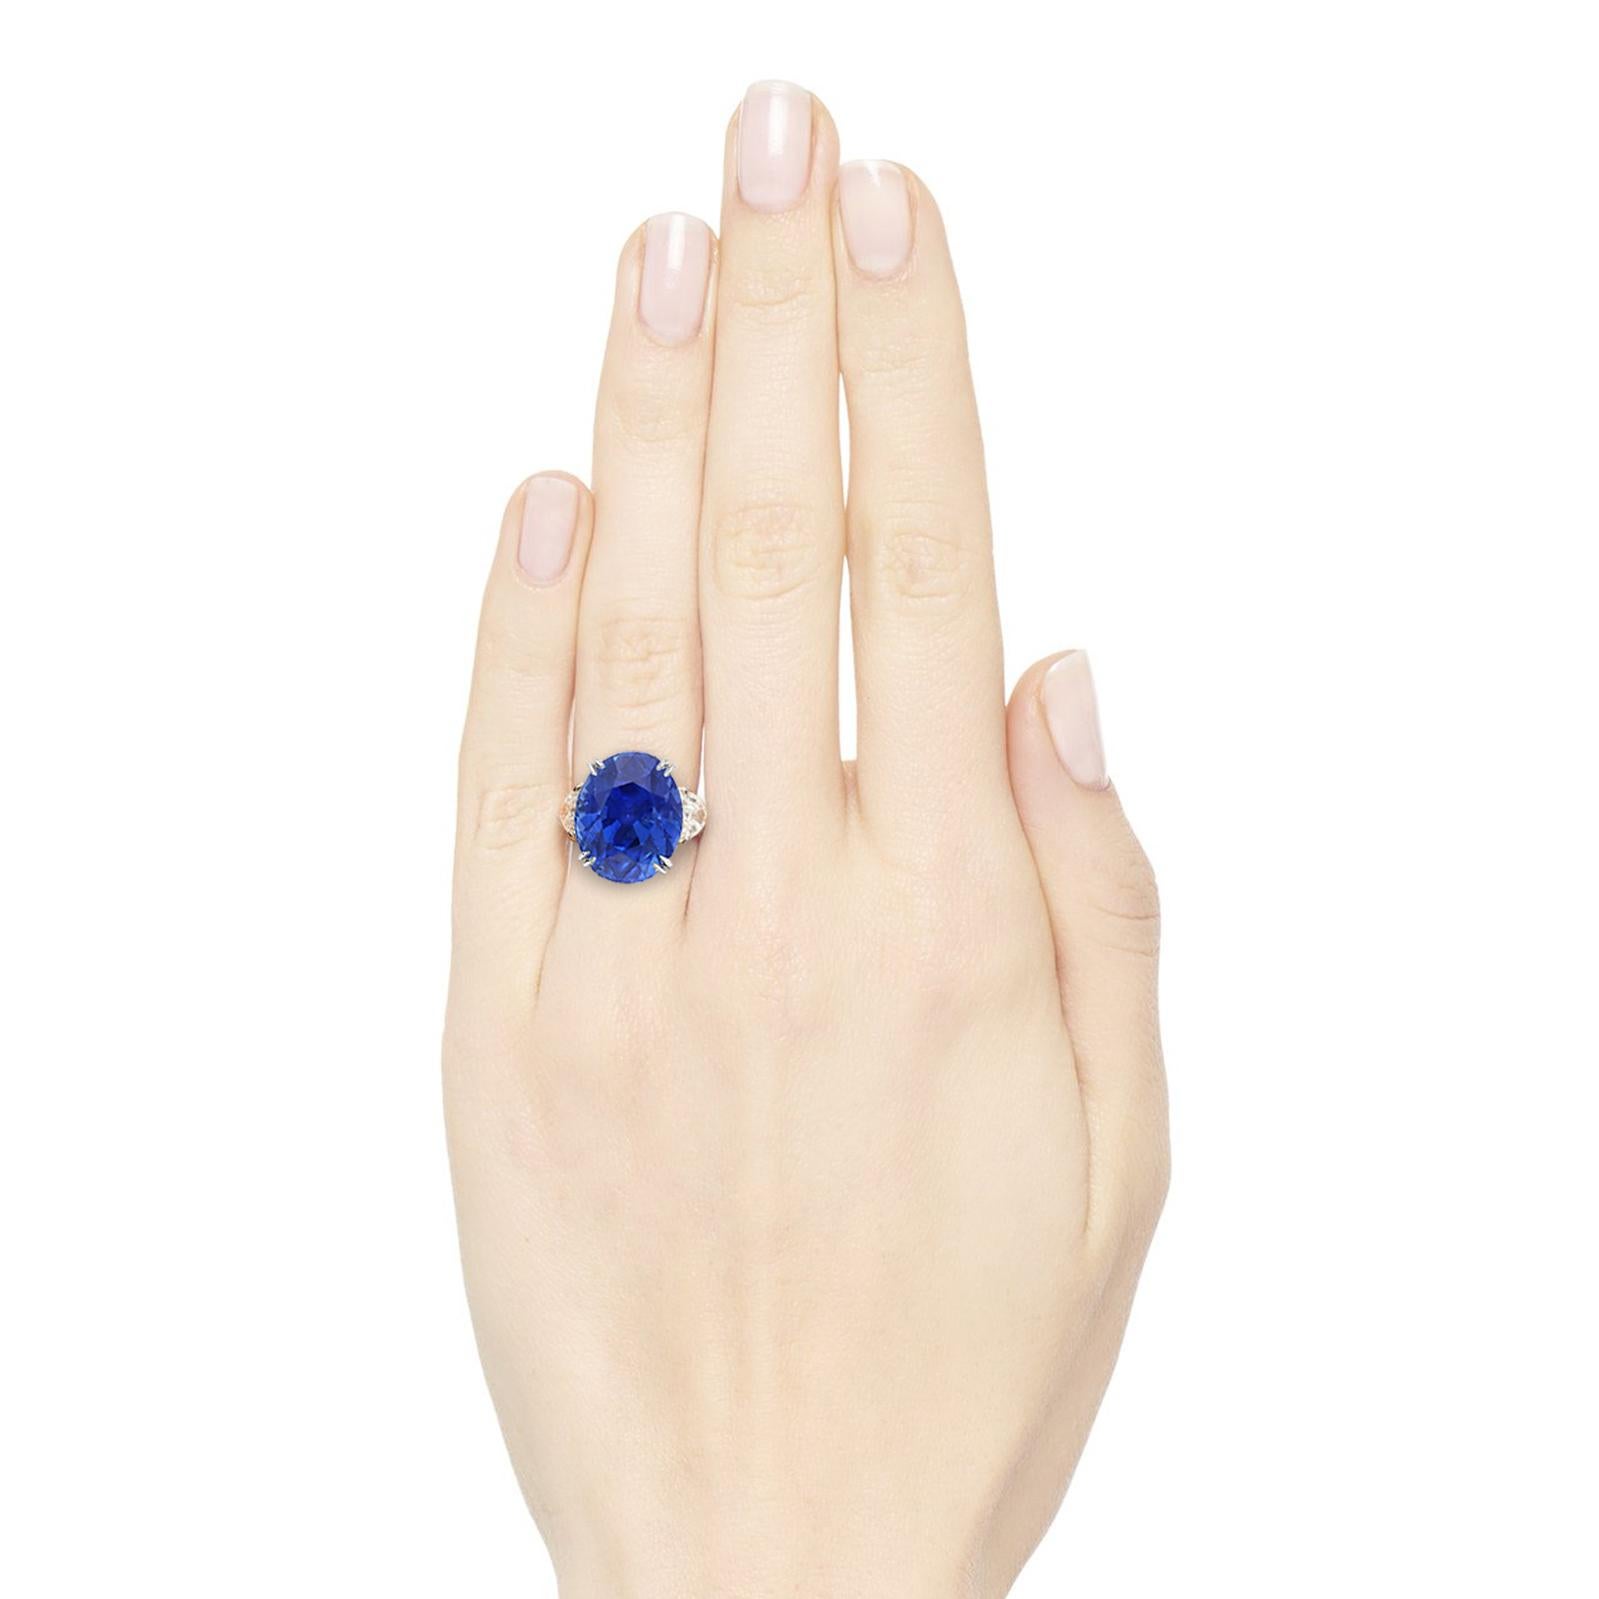 Contemporary GIA Certified 10.9 Carat KASHMIR ORIGIN NO HEAT Oval Blue Sapphire Ring For Sale